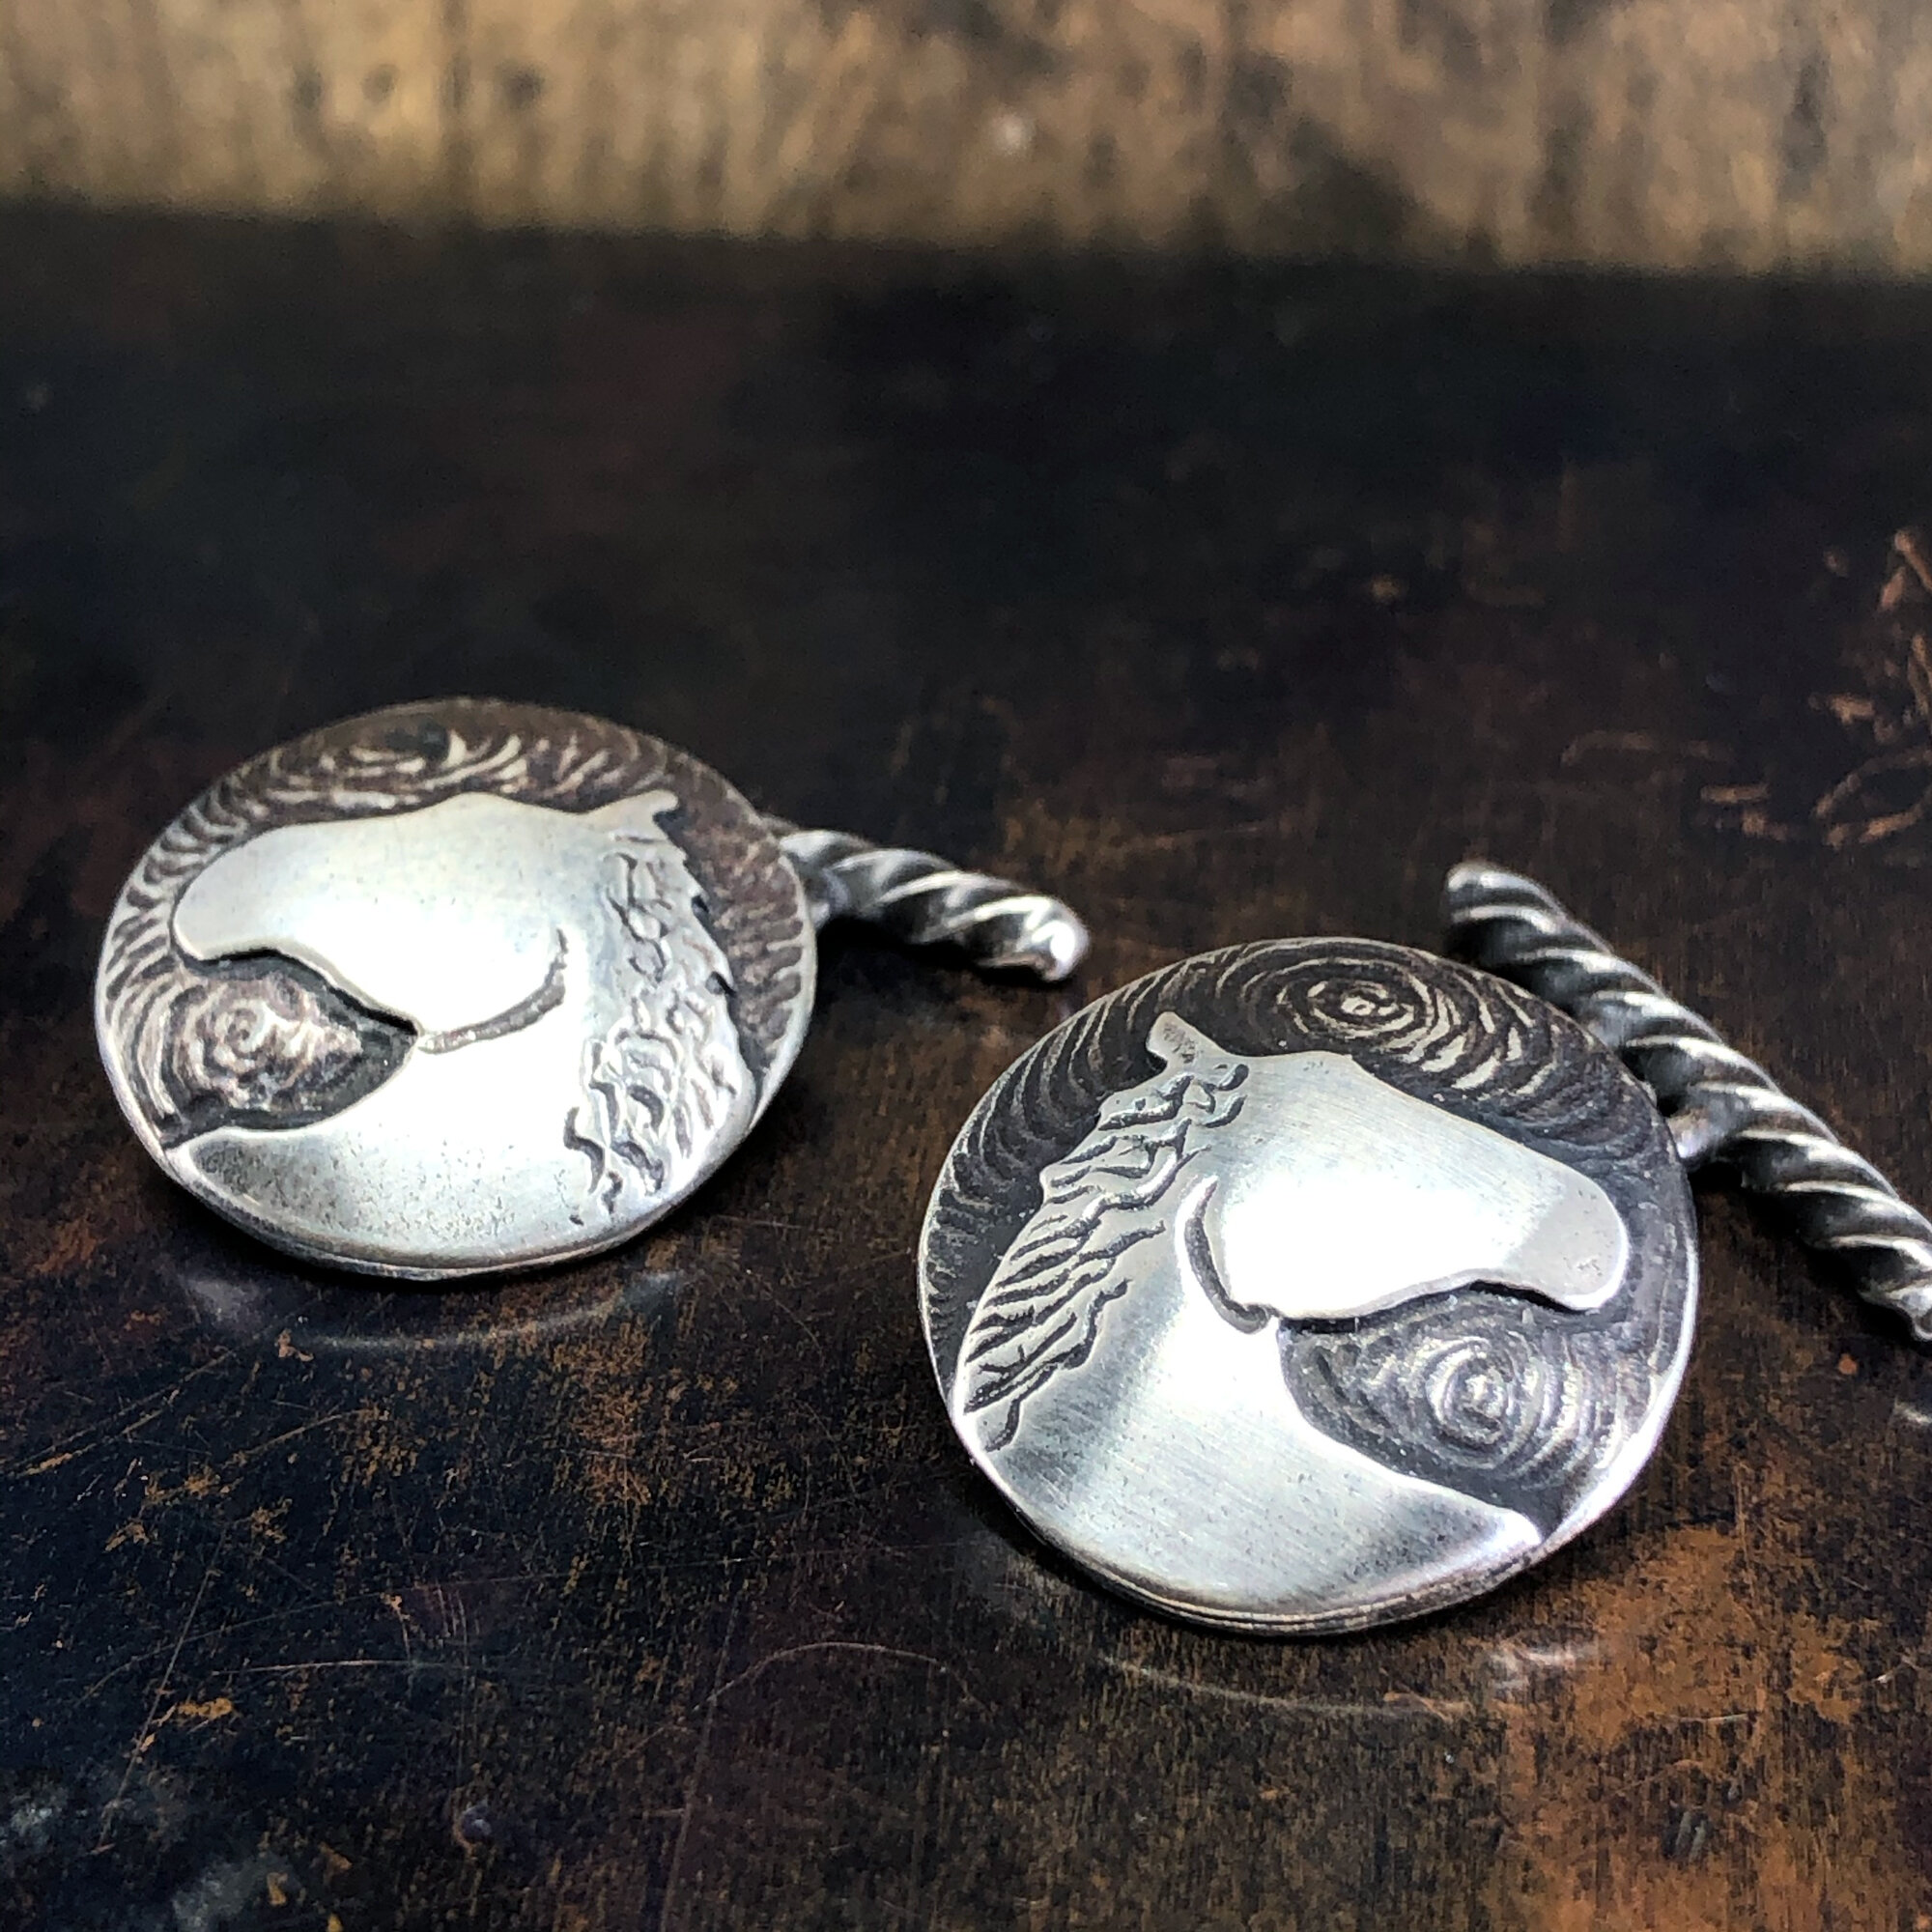 Handmade Sterling Silver Horse Cuff Links beautiful gift or for yourself